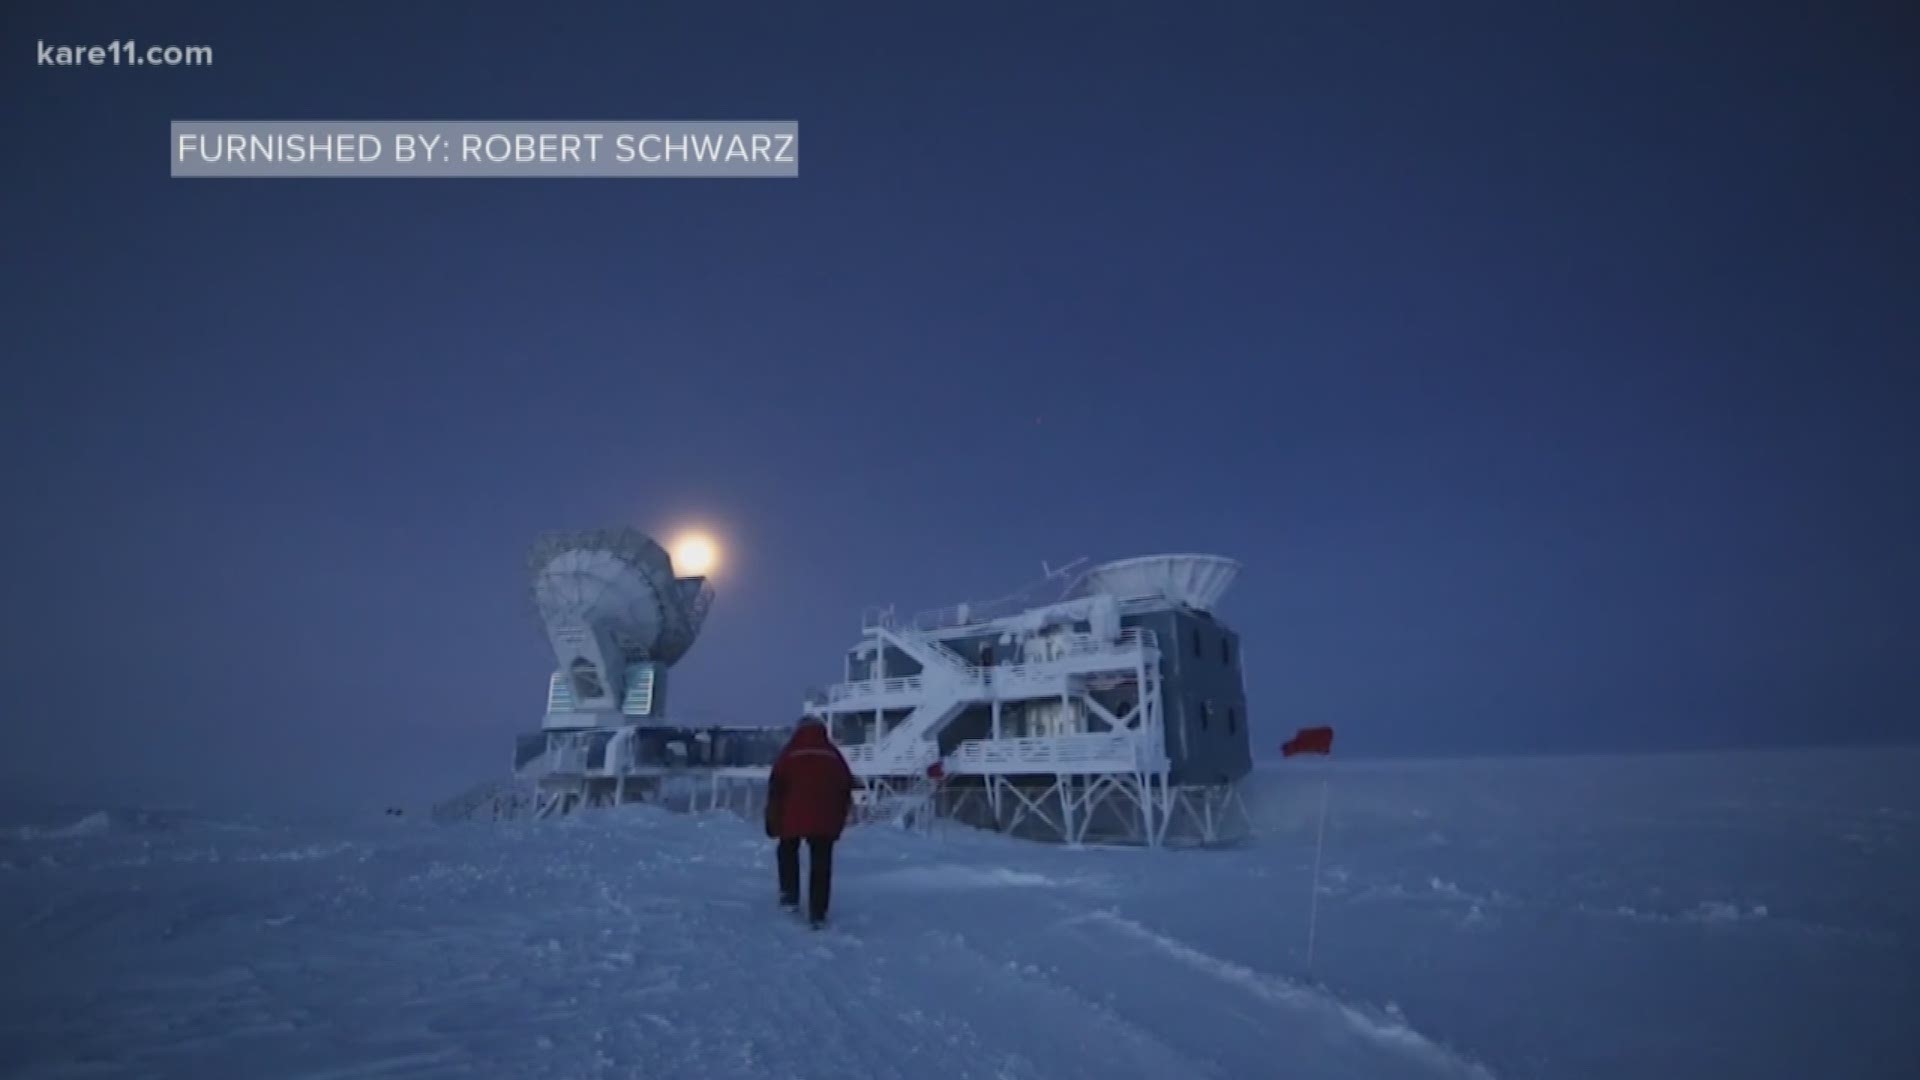 U of M scientist Robert Schwarz has spent the most winters, more than anyone else, in total darkness at the South Pole. What he is looking for is how the universe formed. https://kare11.tv/2CEOTrp